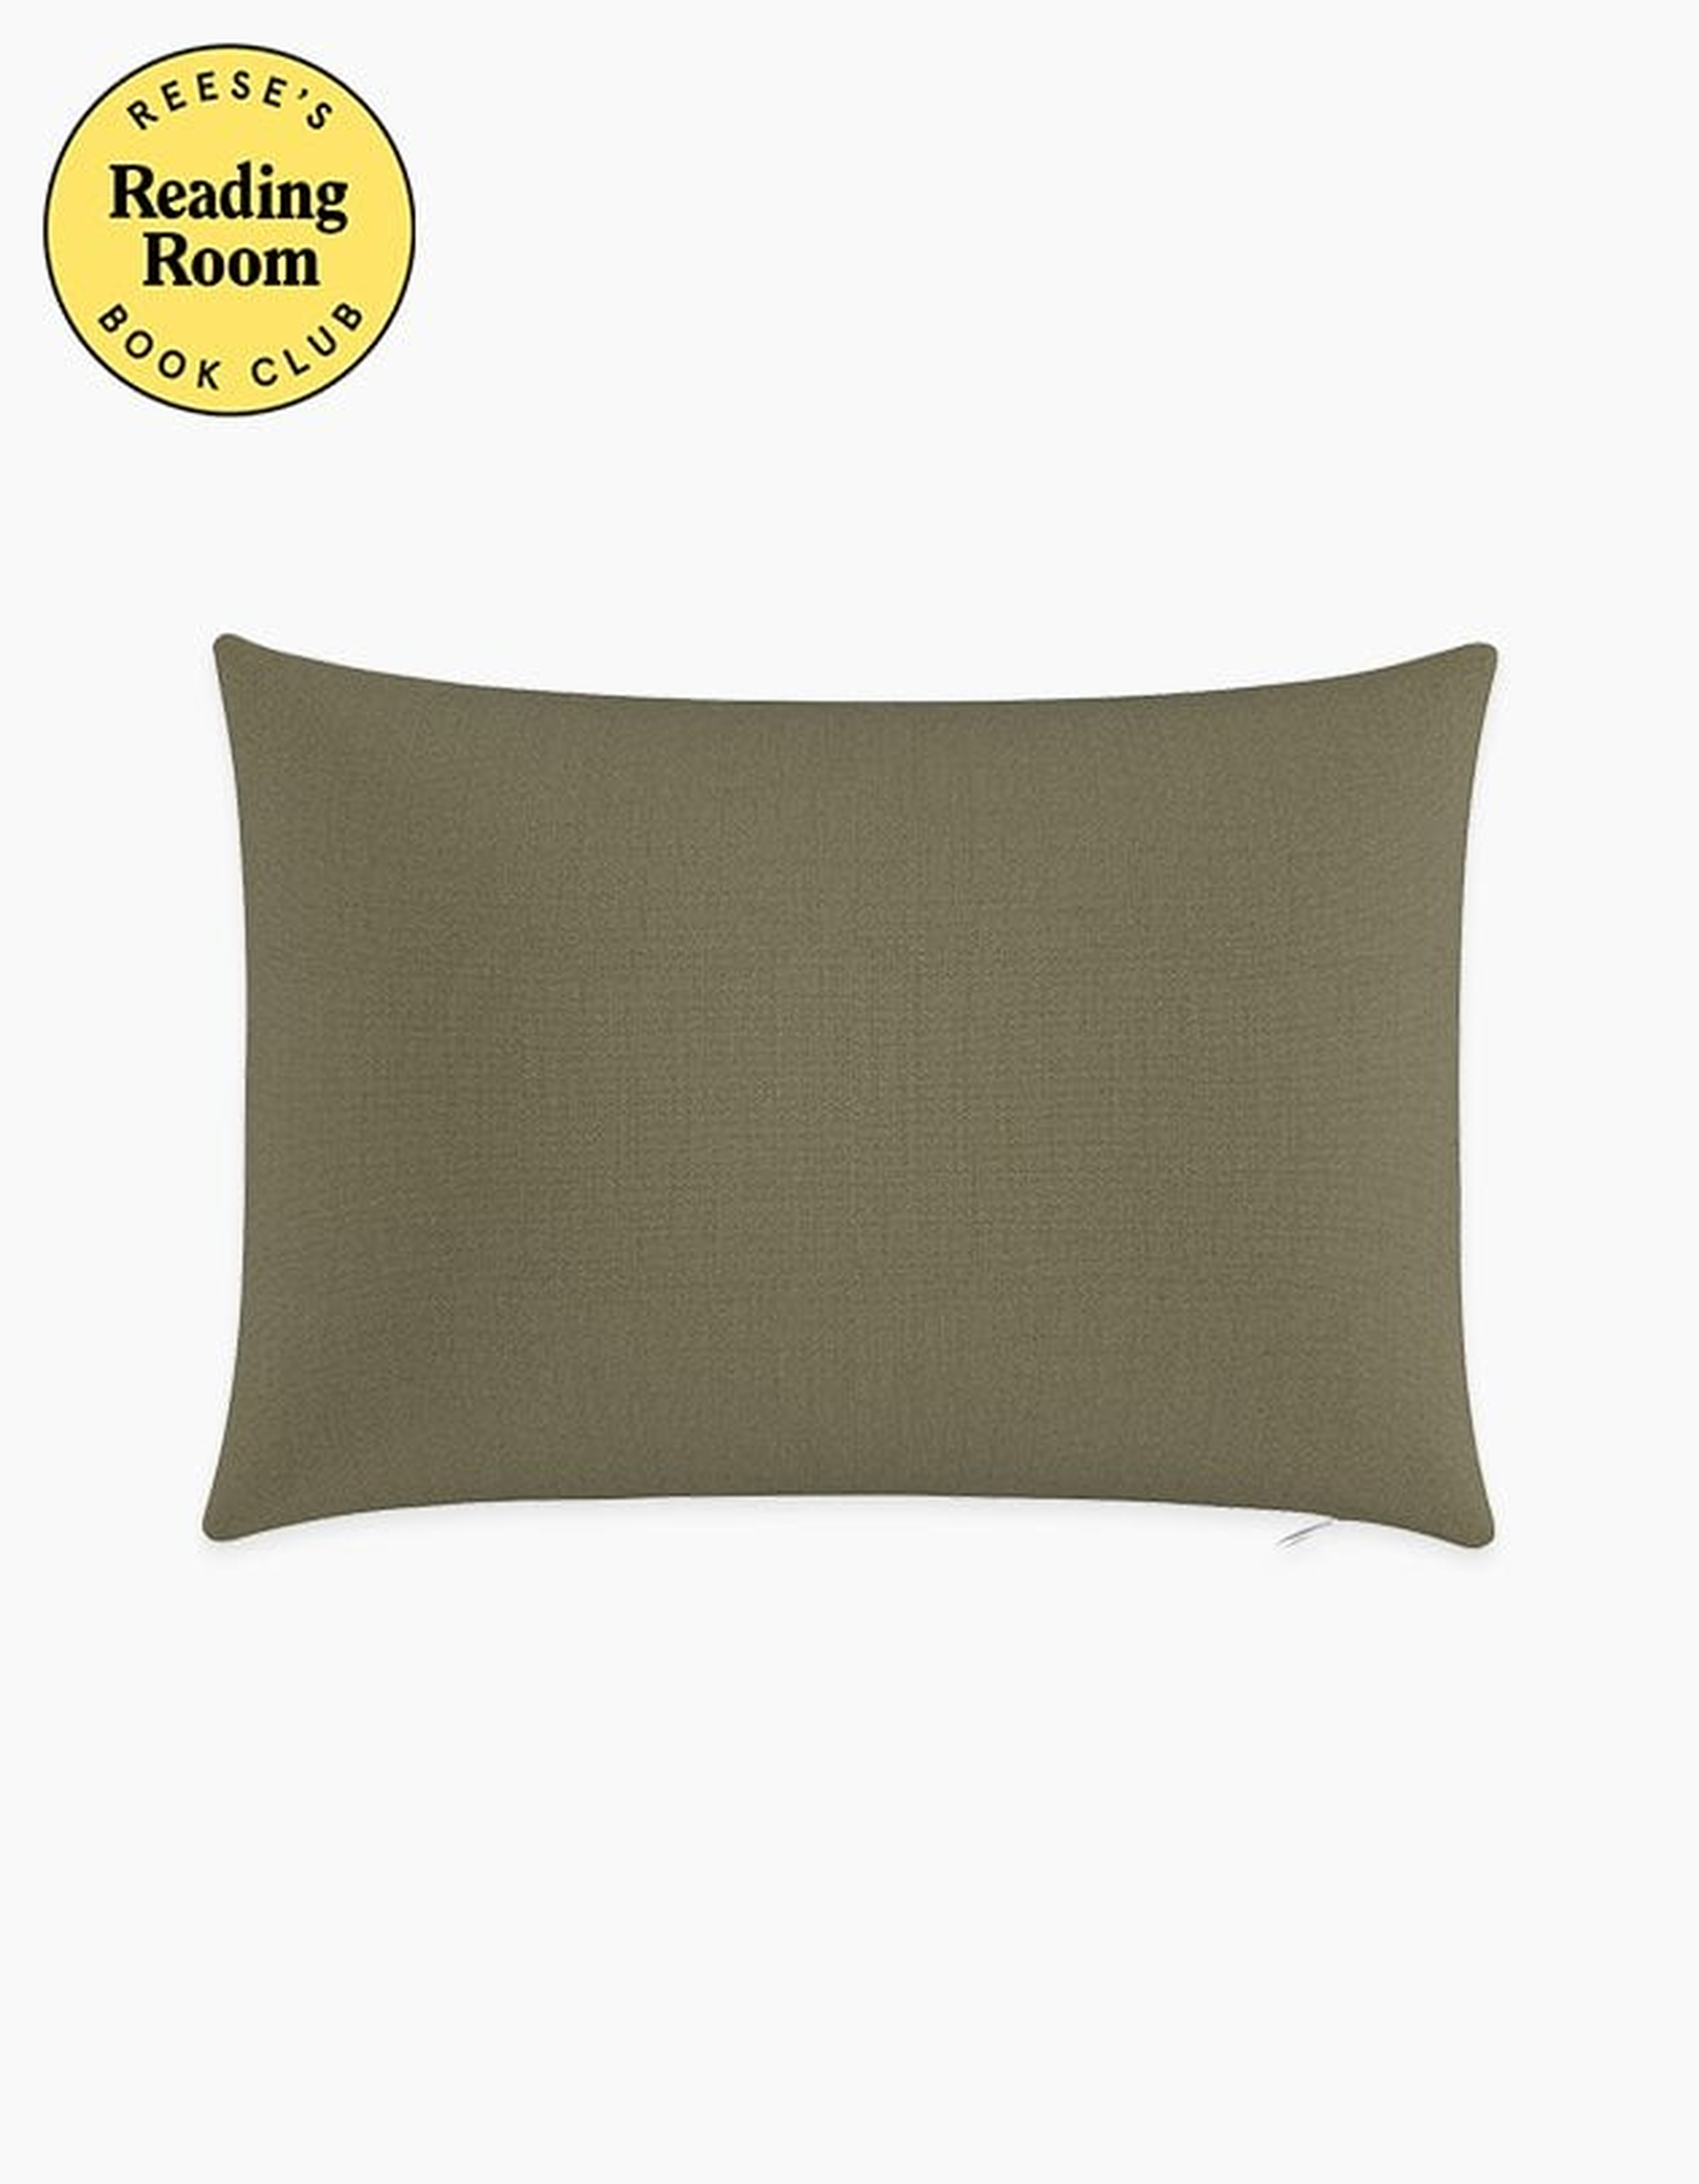 Olive Linen Throw Pillow - 14" x 20" - Reese's Book Club x Havenly